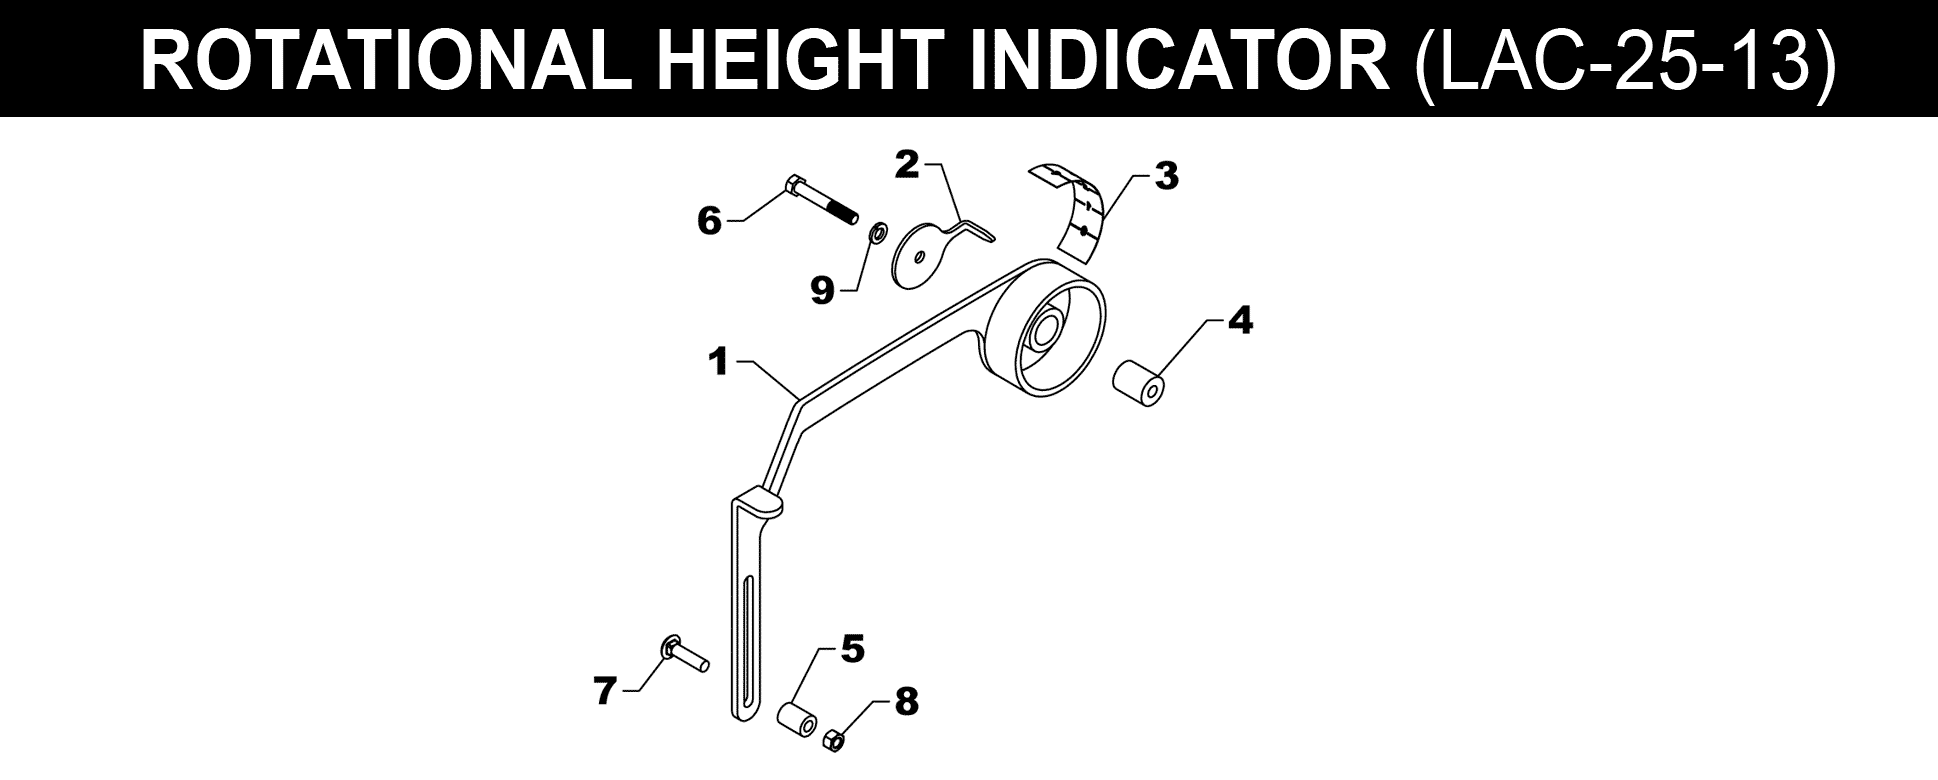 Height Indicator - LAC-25-13